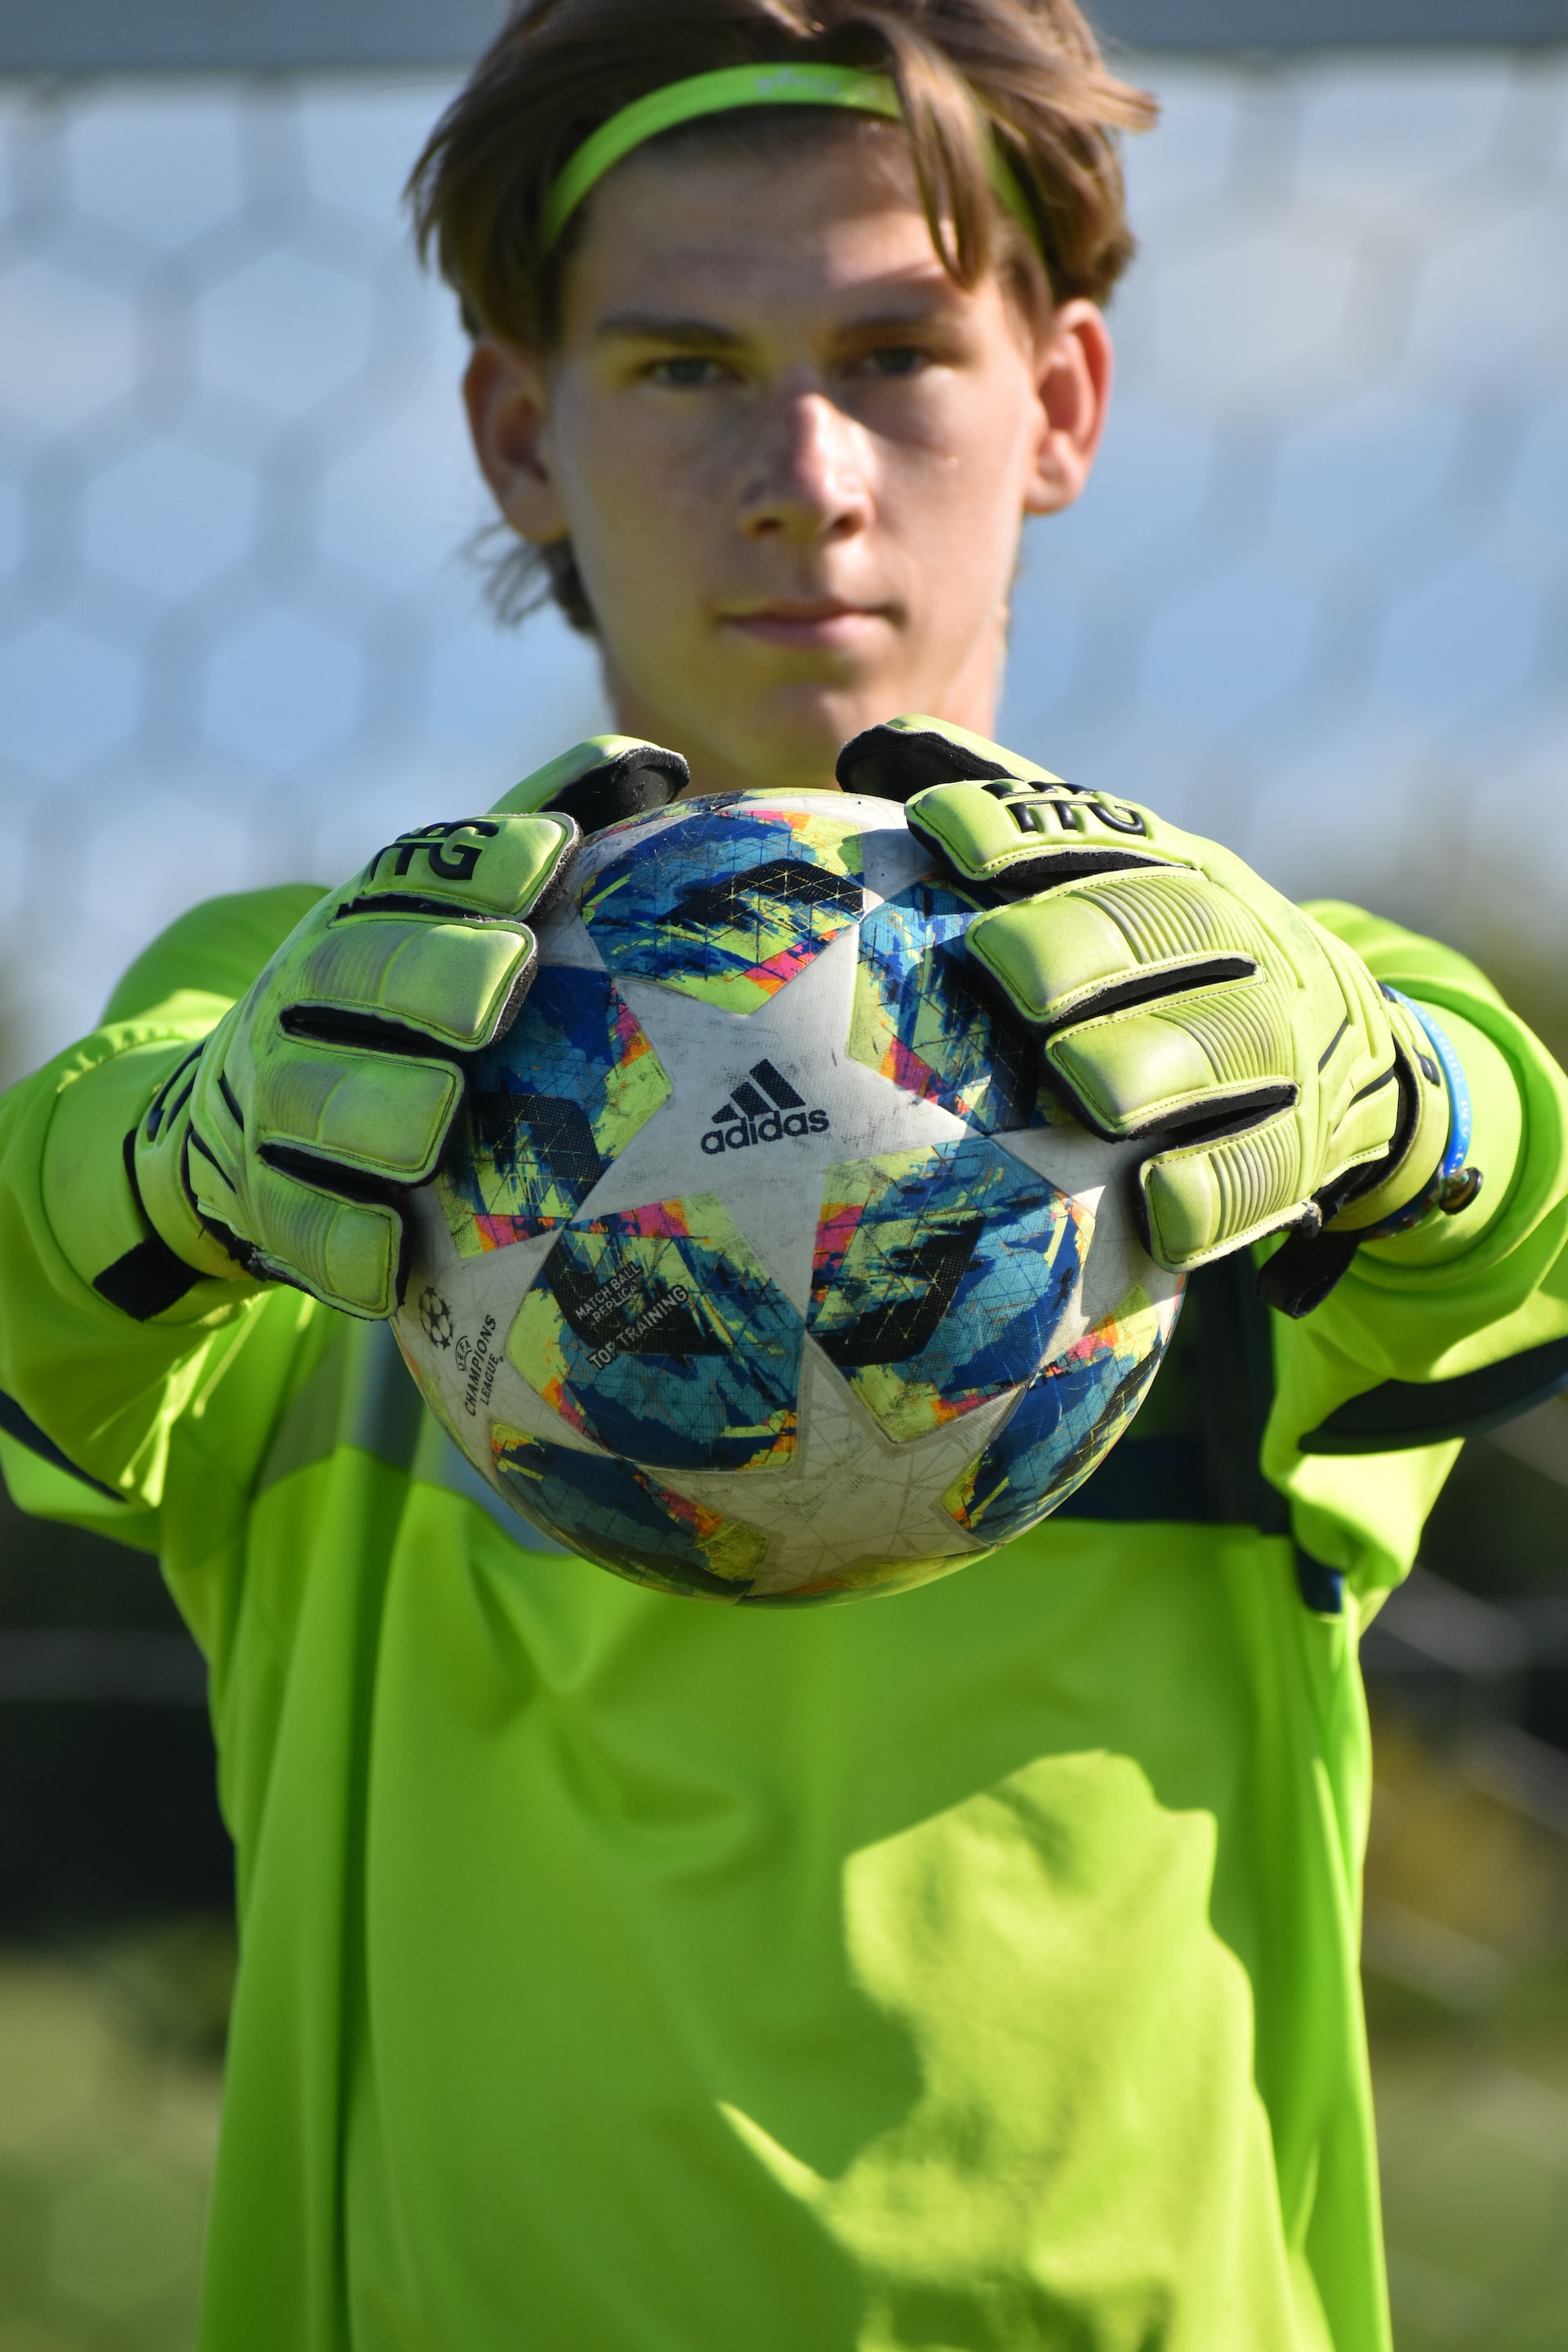 Young goalkeeper holding a ball